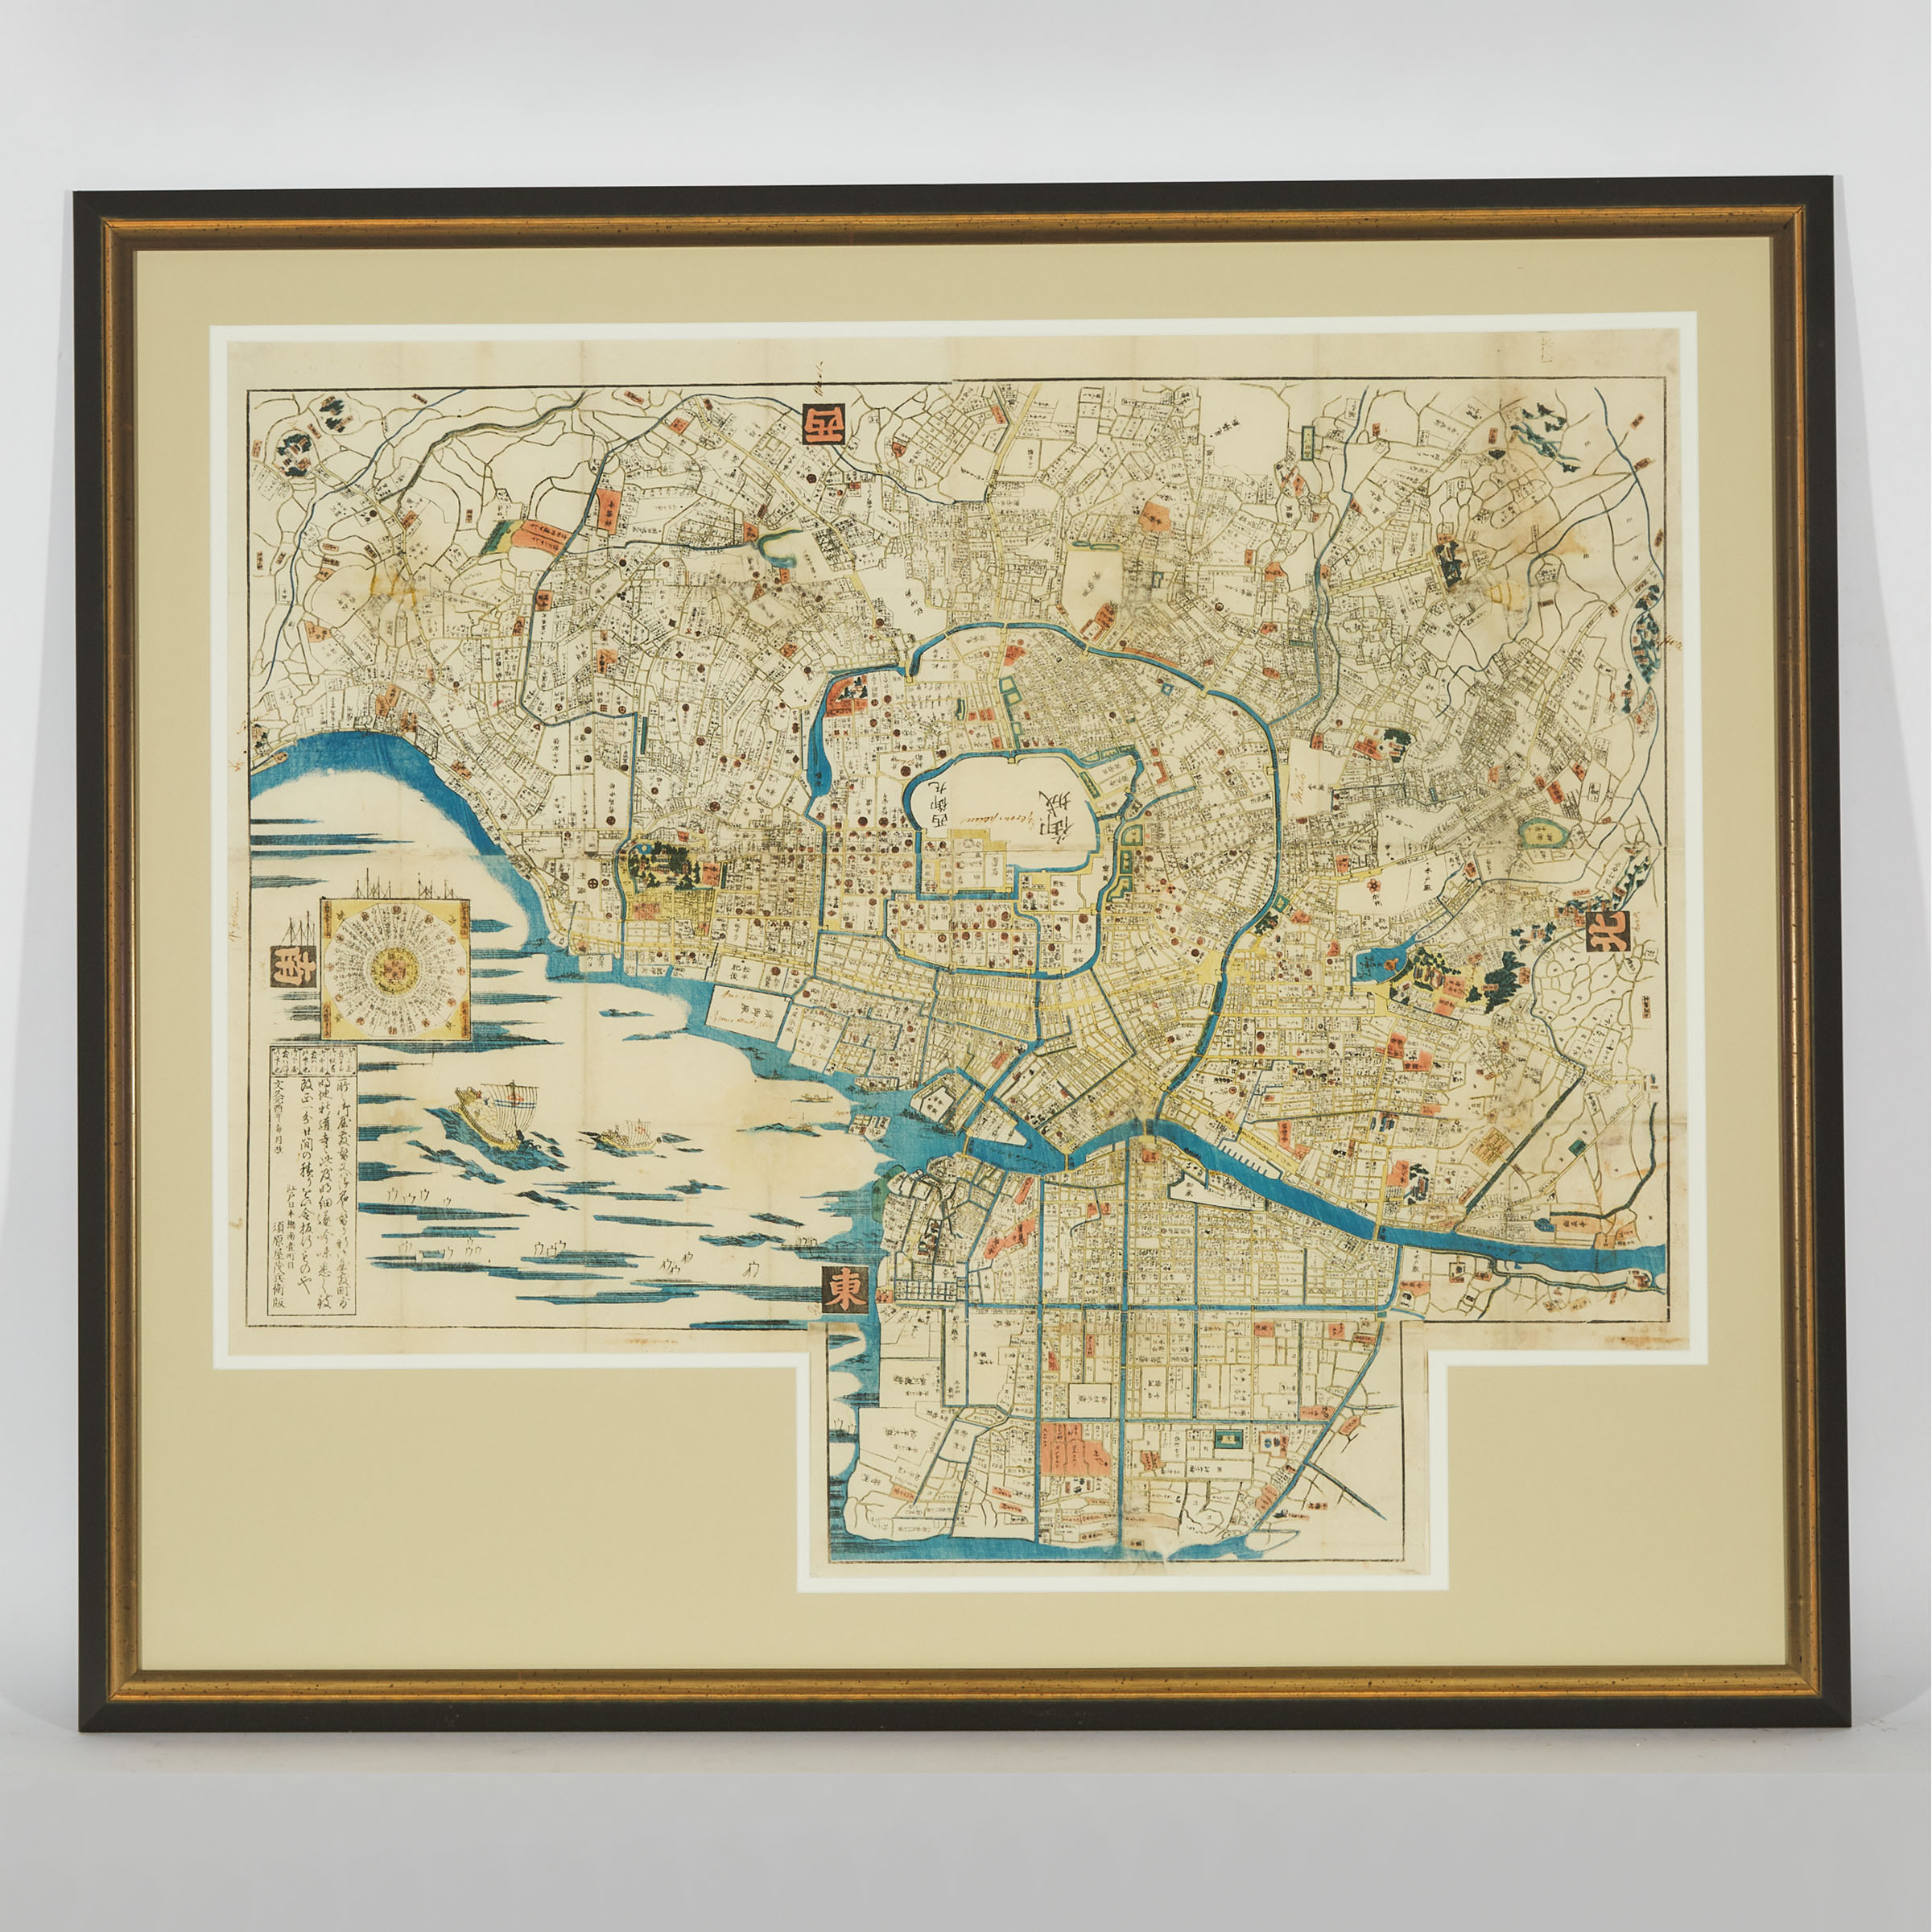 A Large-Scale Map of Edo (Tokyo), Dated 1861